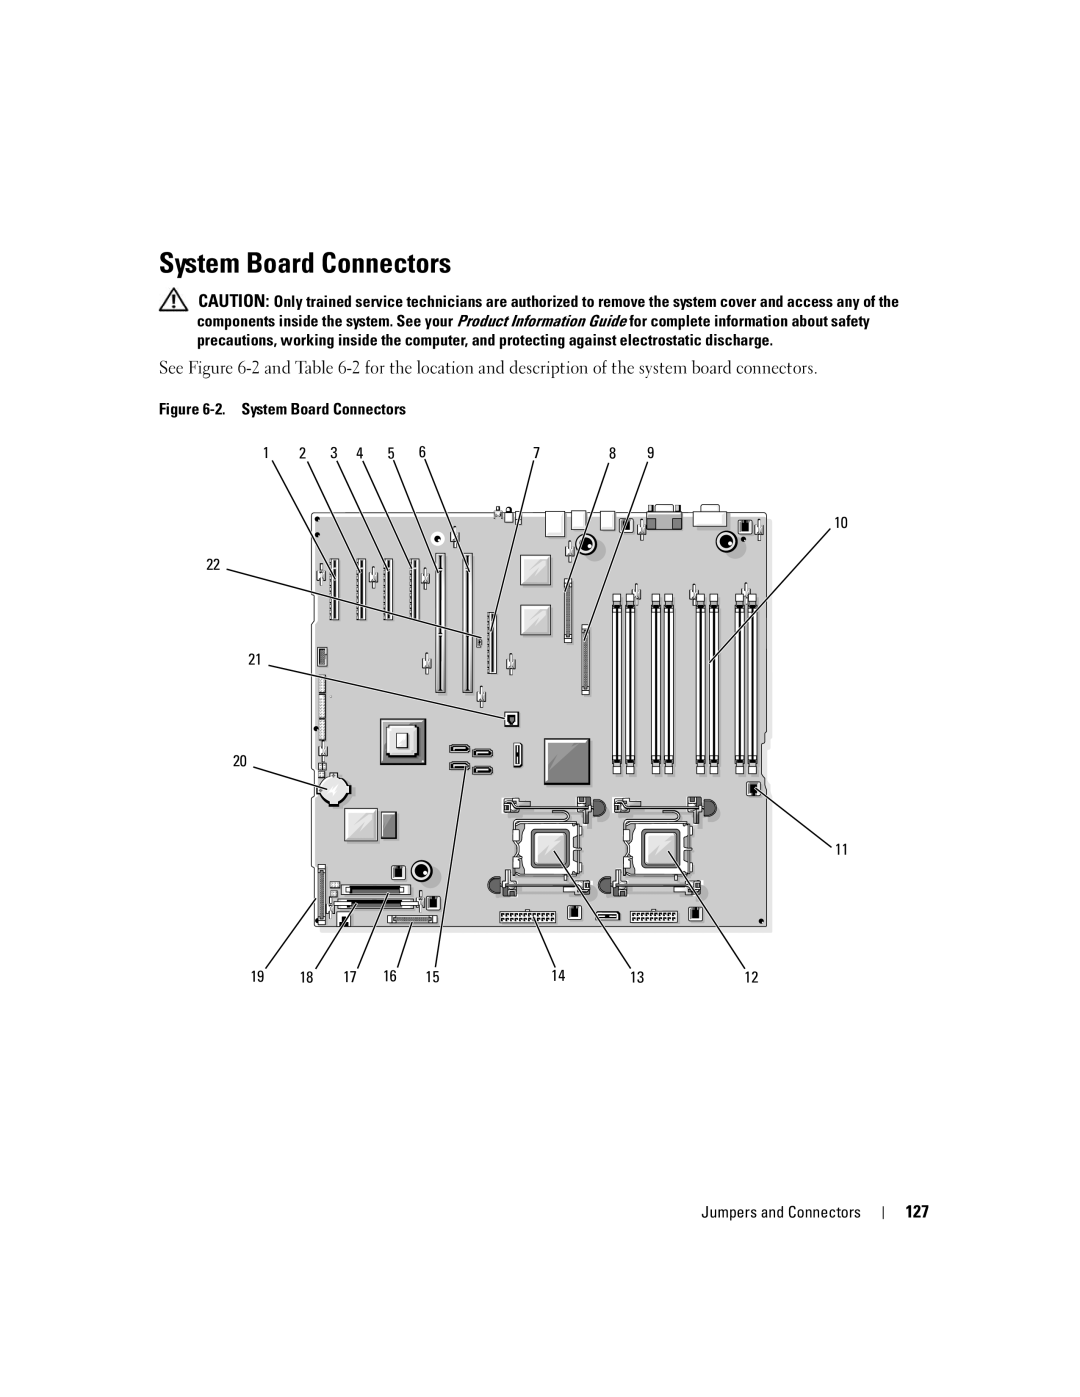 Dell 1900 owner manual System Board Connectors, 127 